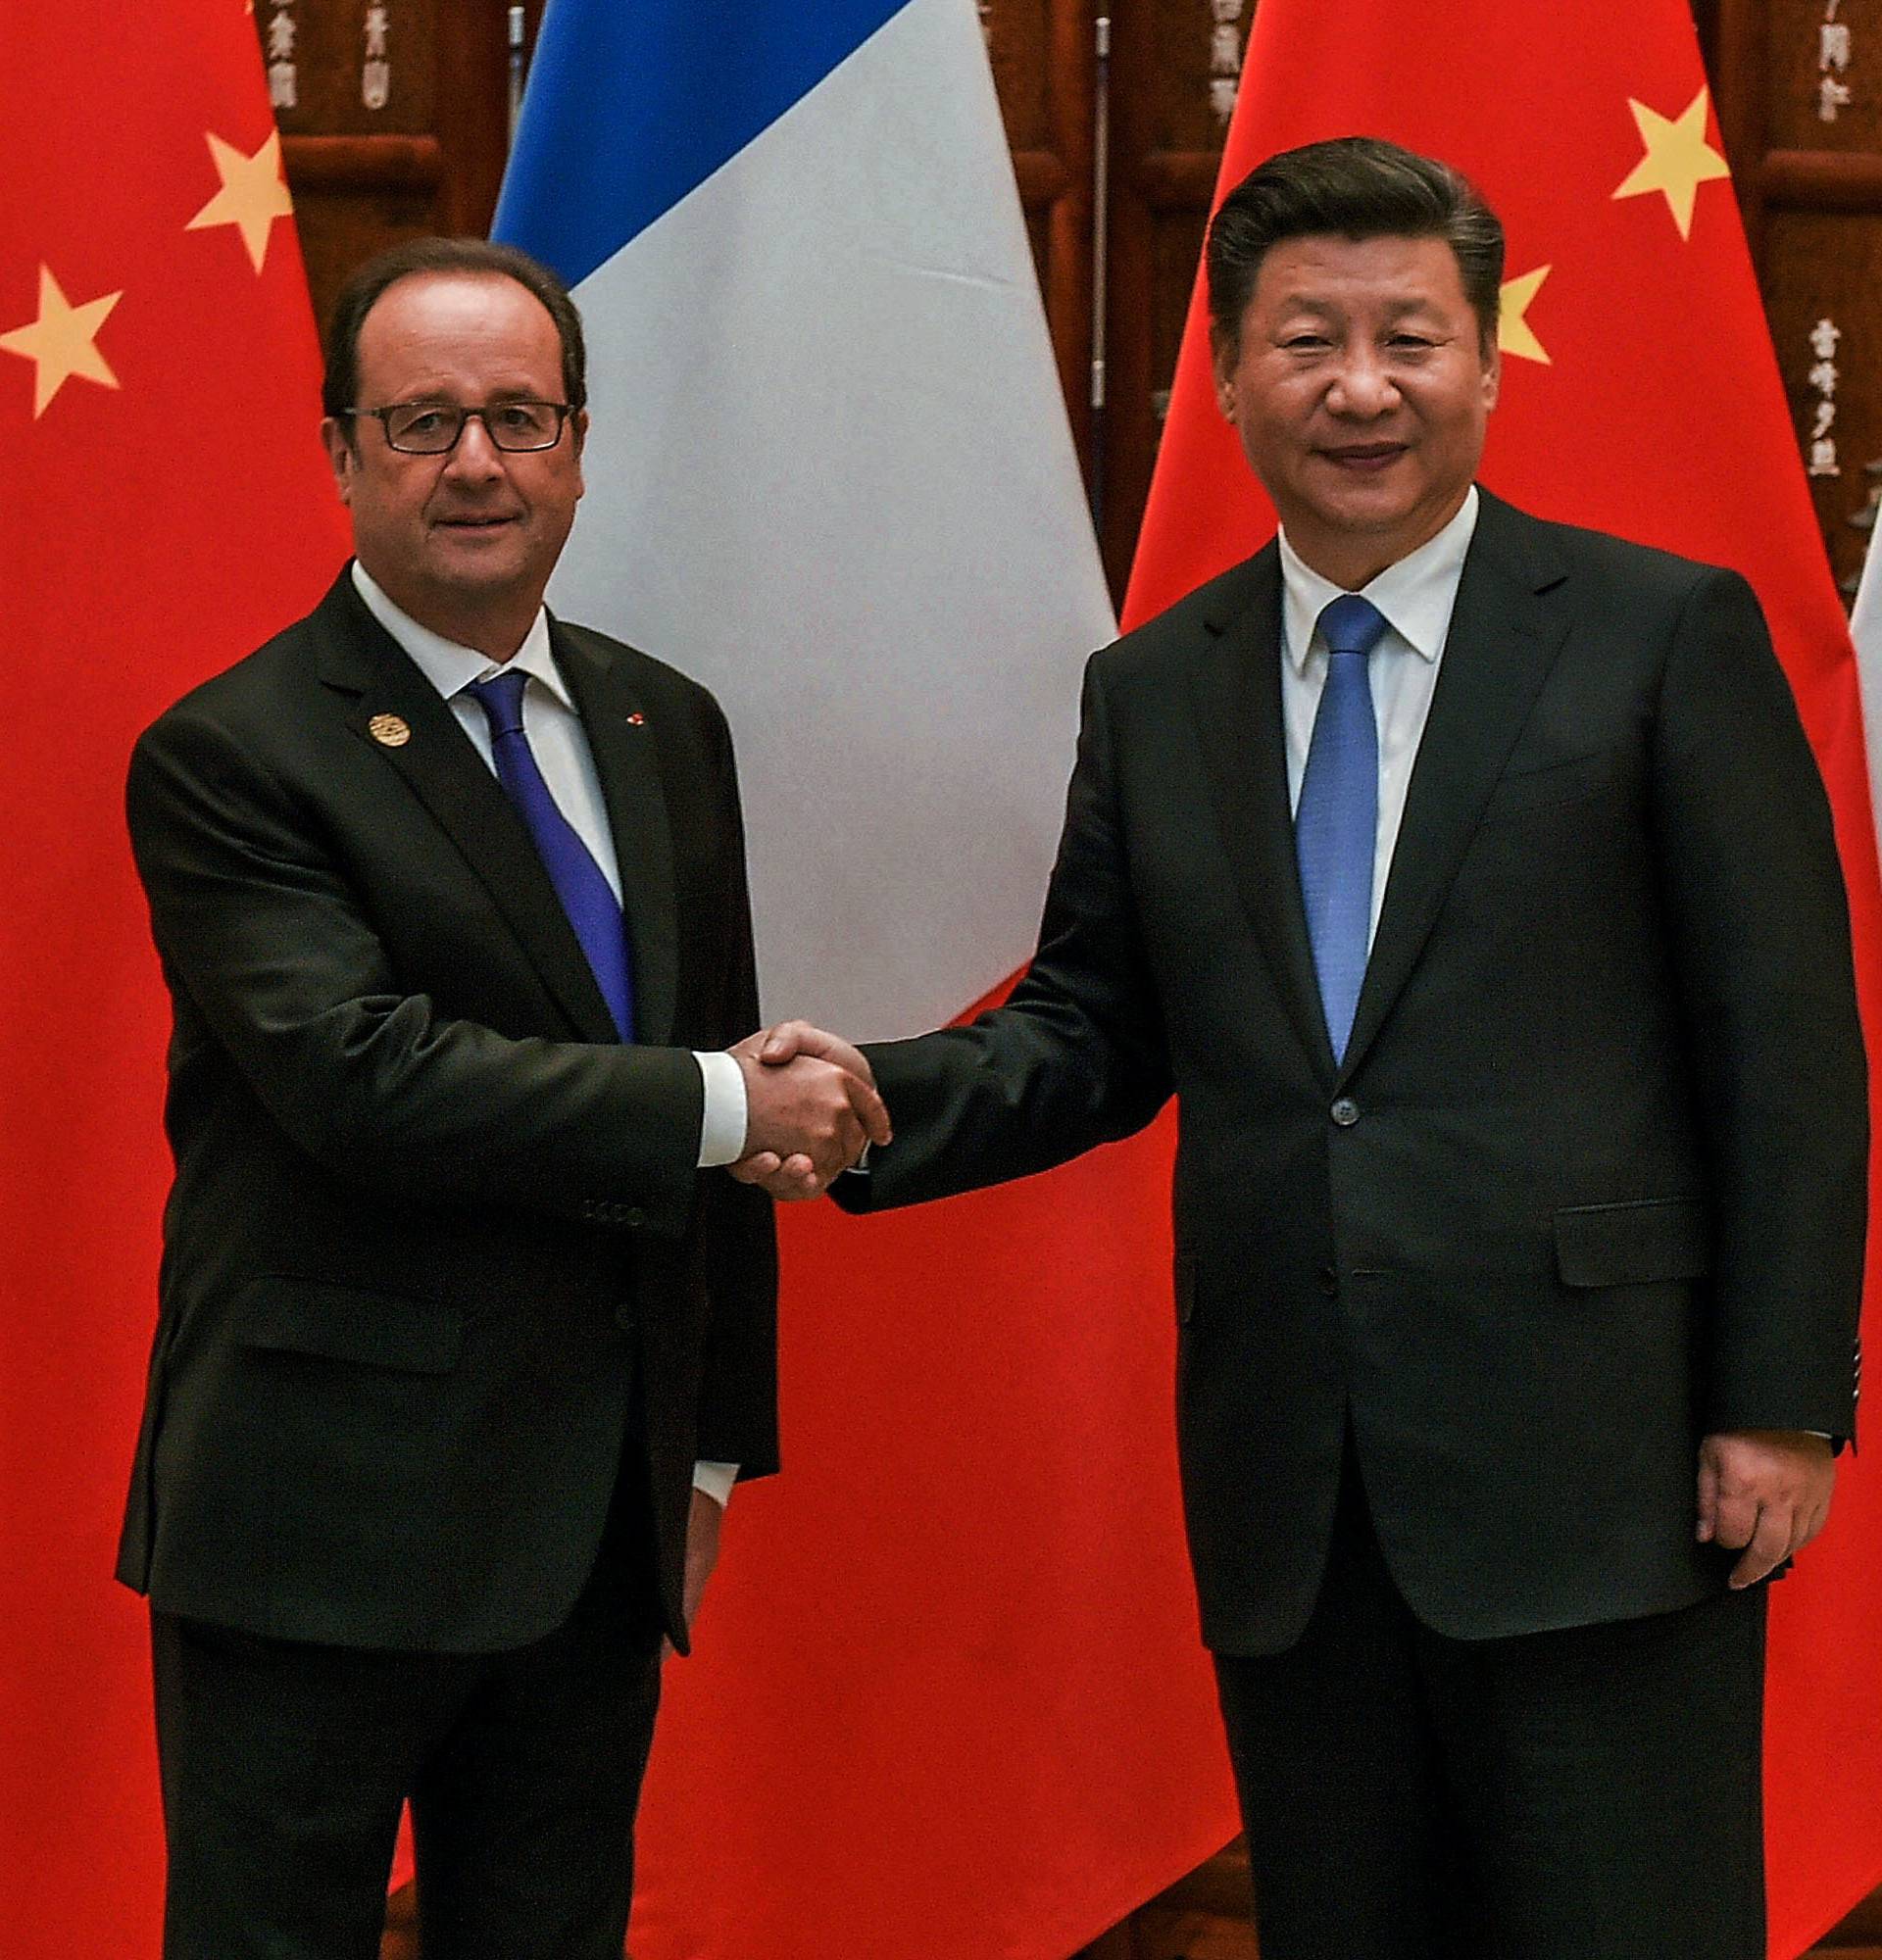 Chinese President Xi Jinping shakes hands with French President Francois Hollande before their meeting at the West Lake State House on the sidelines of the G20 Summit, in Hangzhou